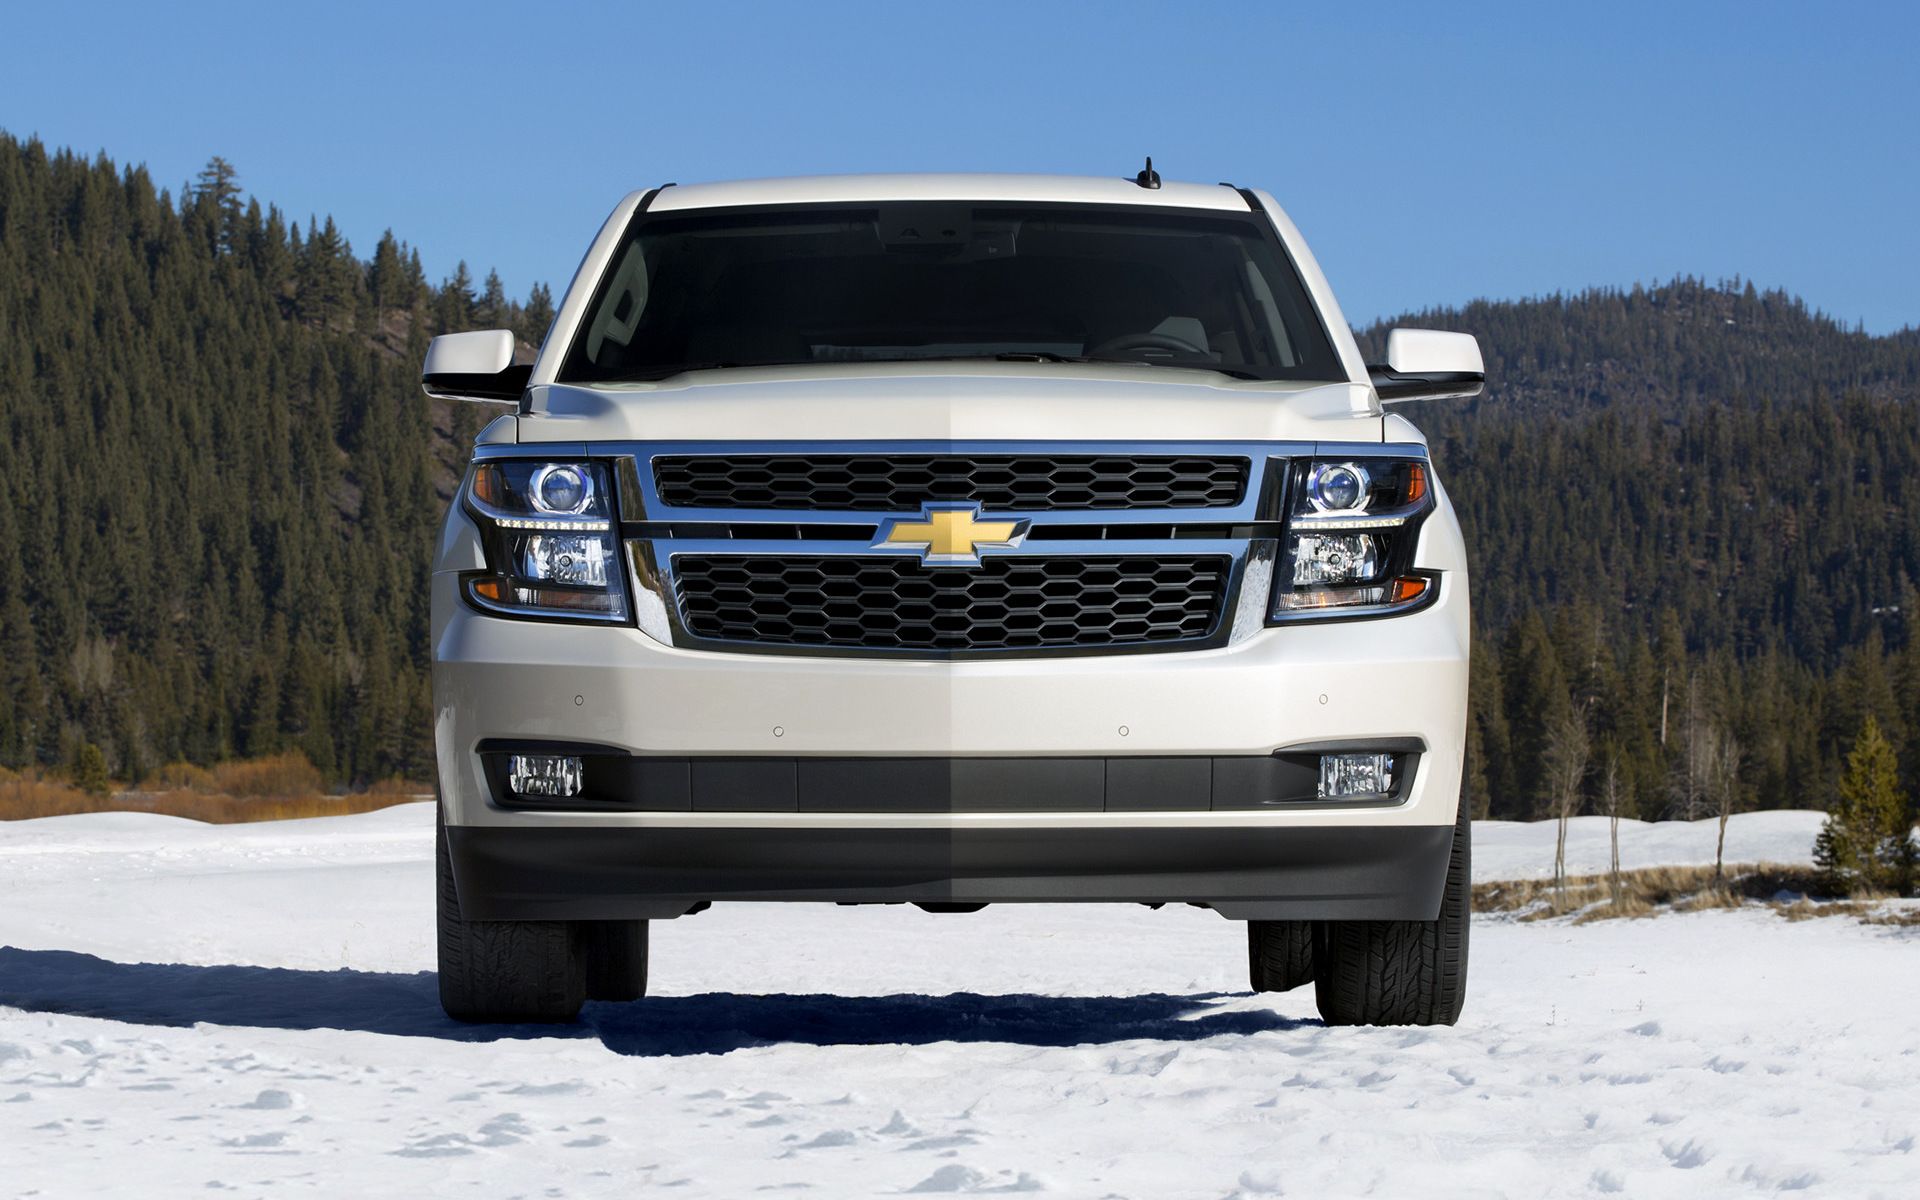 Chevy Tahoe Wallpaper Free Chevy Tahoe Background